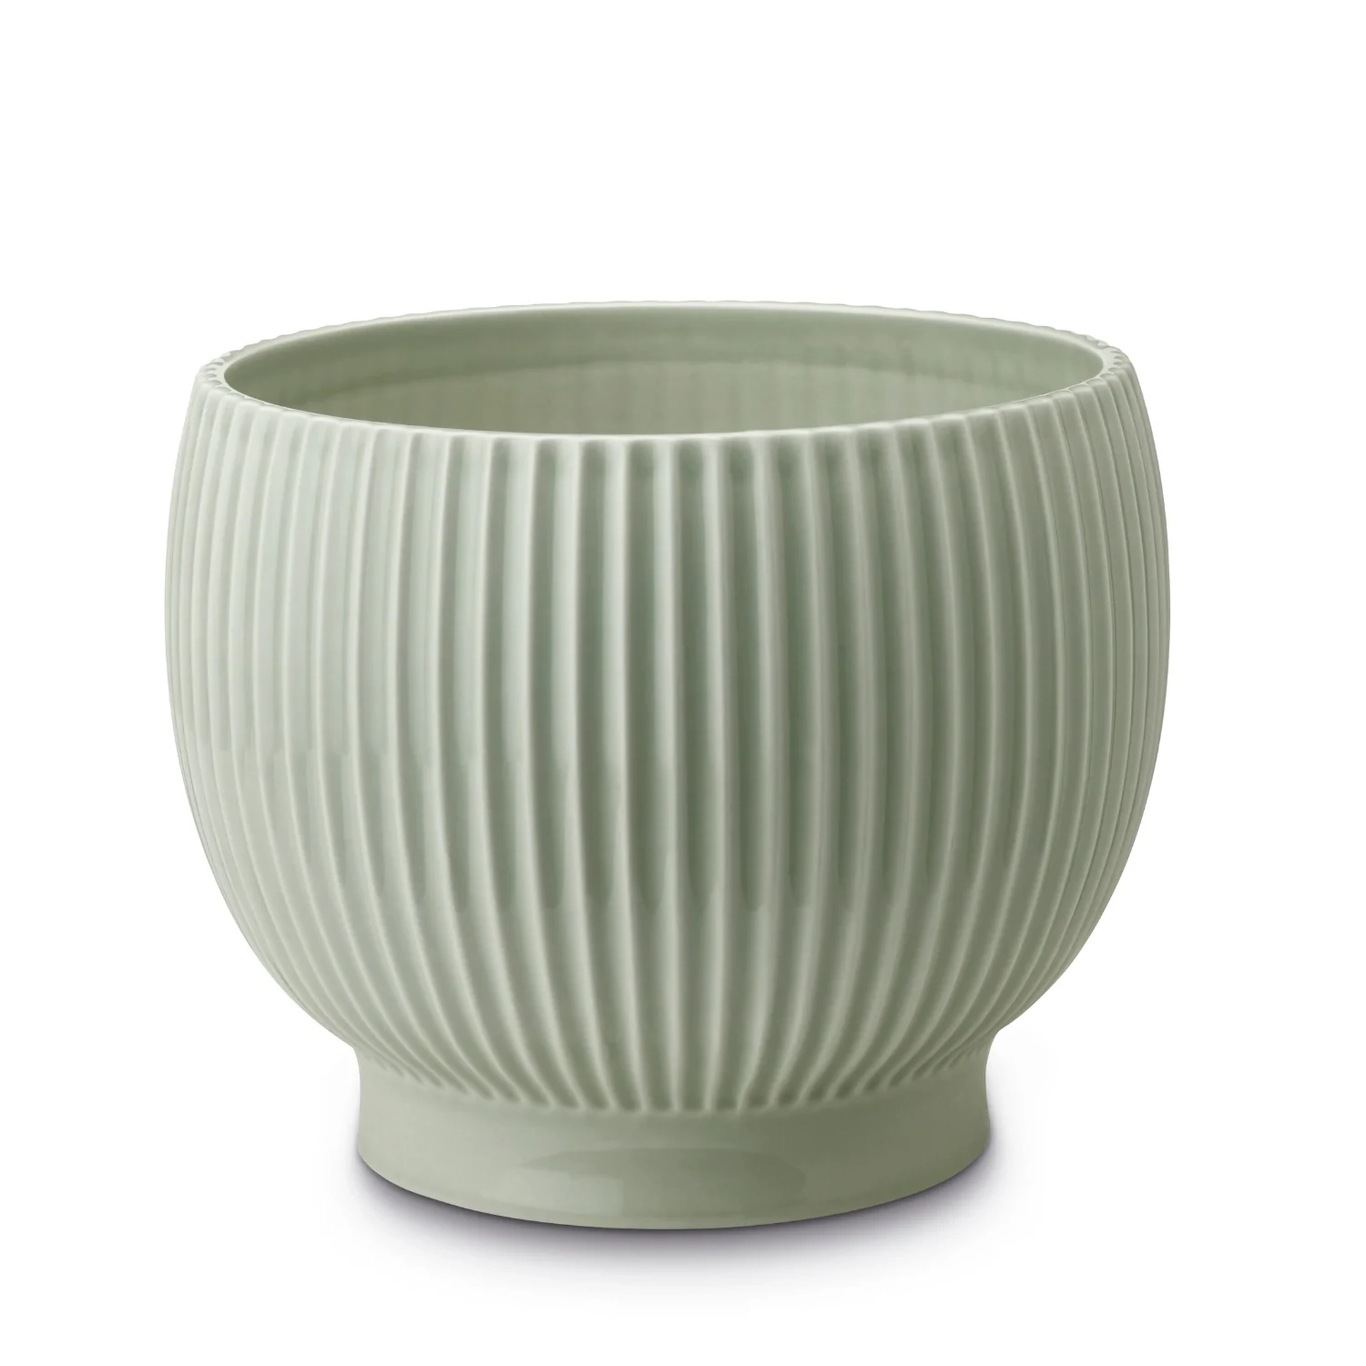 Outer Pot Grooved Ø16,5 cm, Mint Green